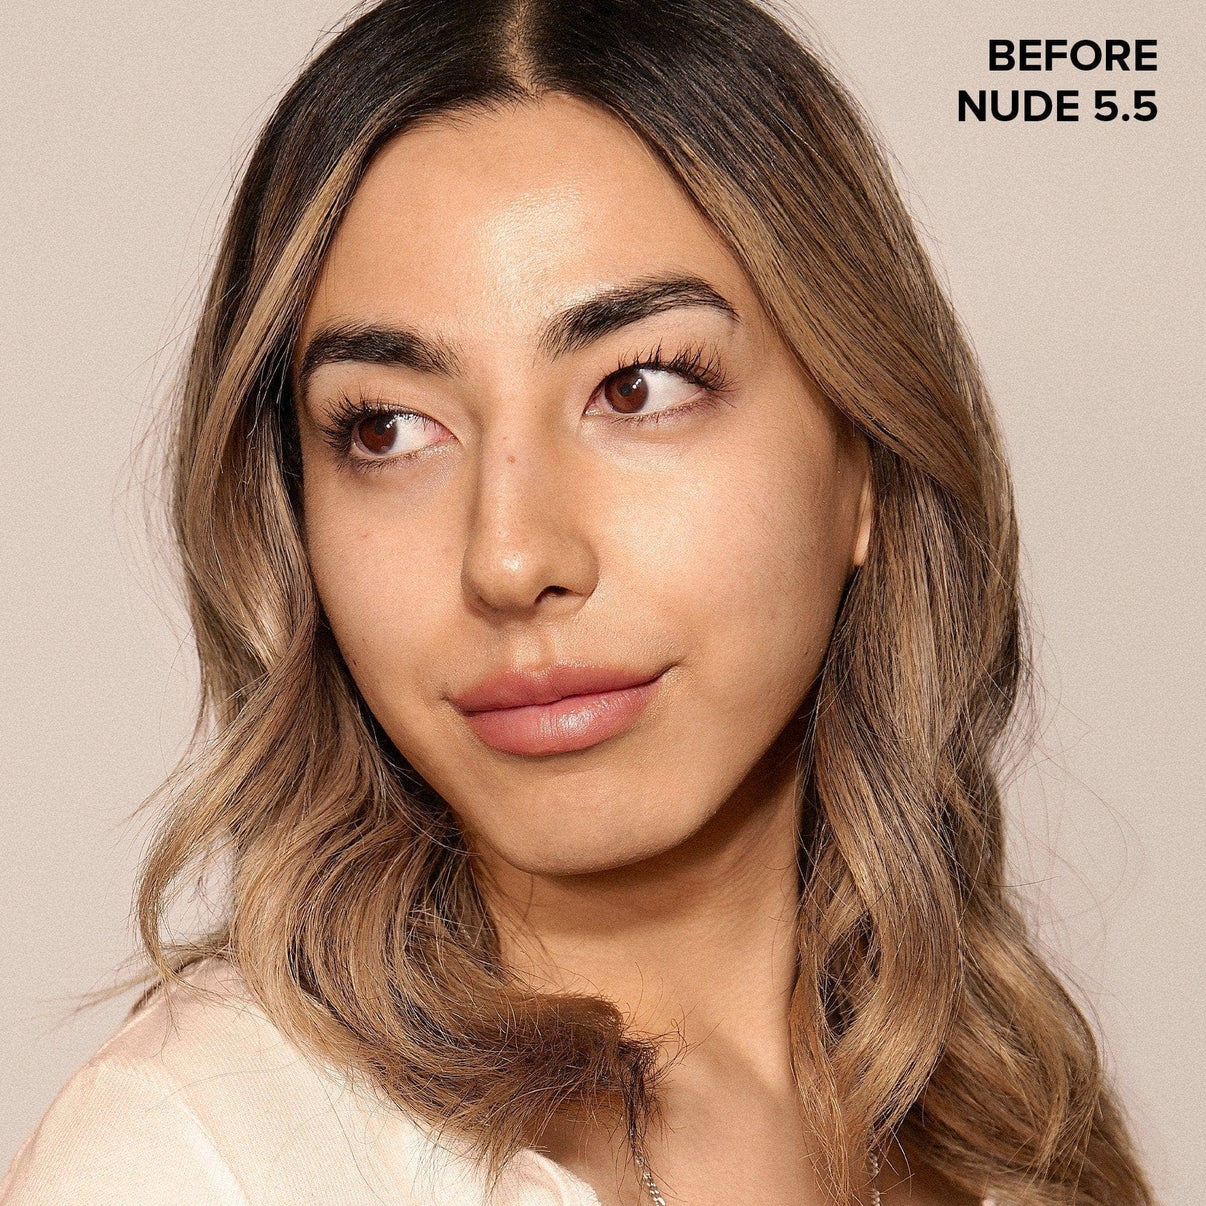 Young woman before wearing Nudefix cream concealer nude 5.5